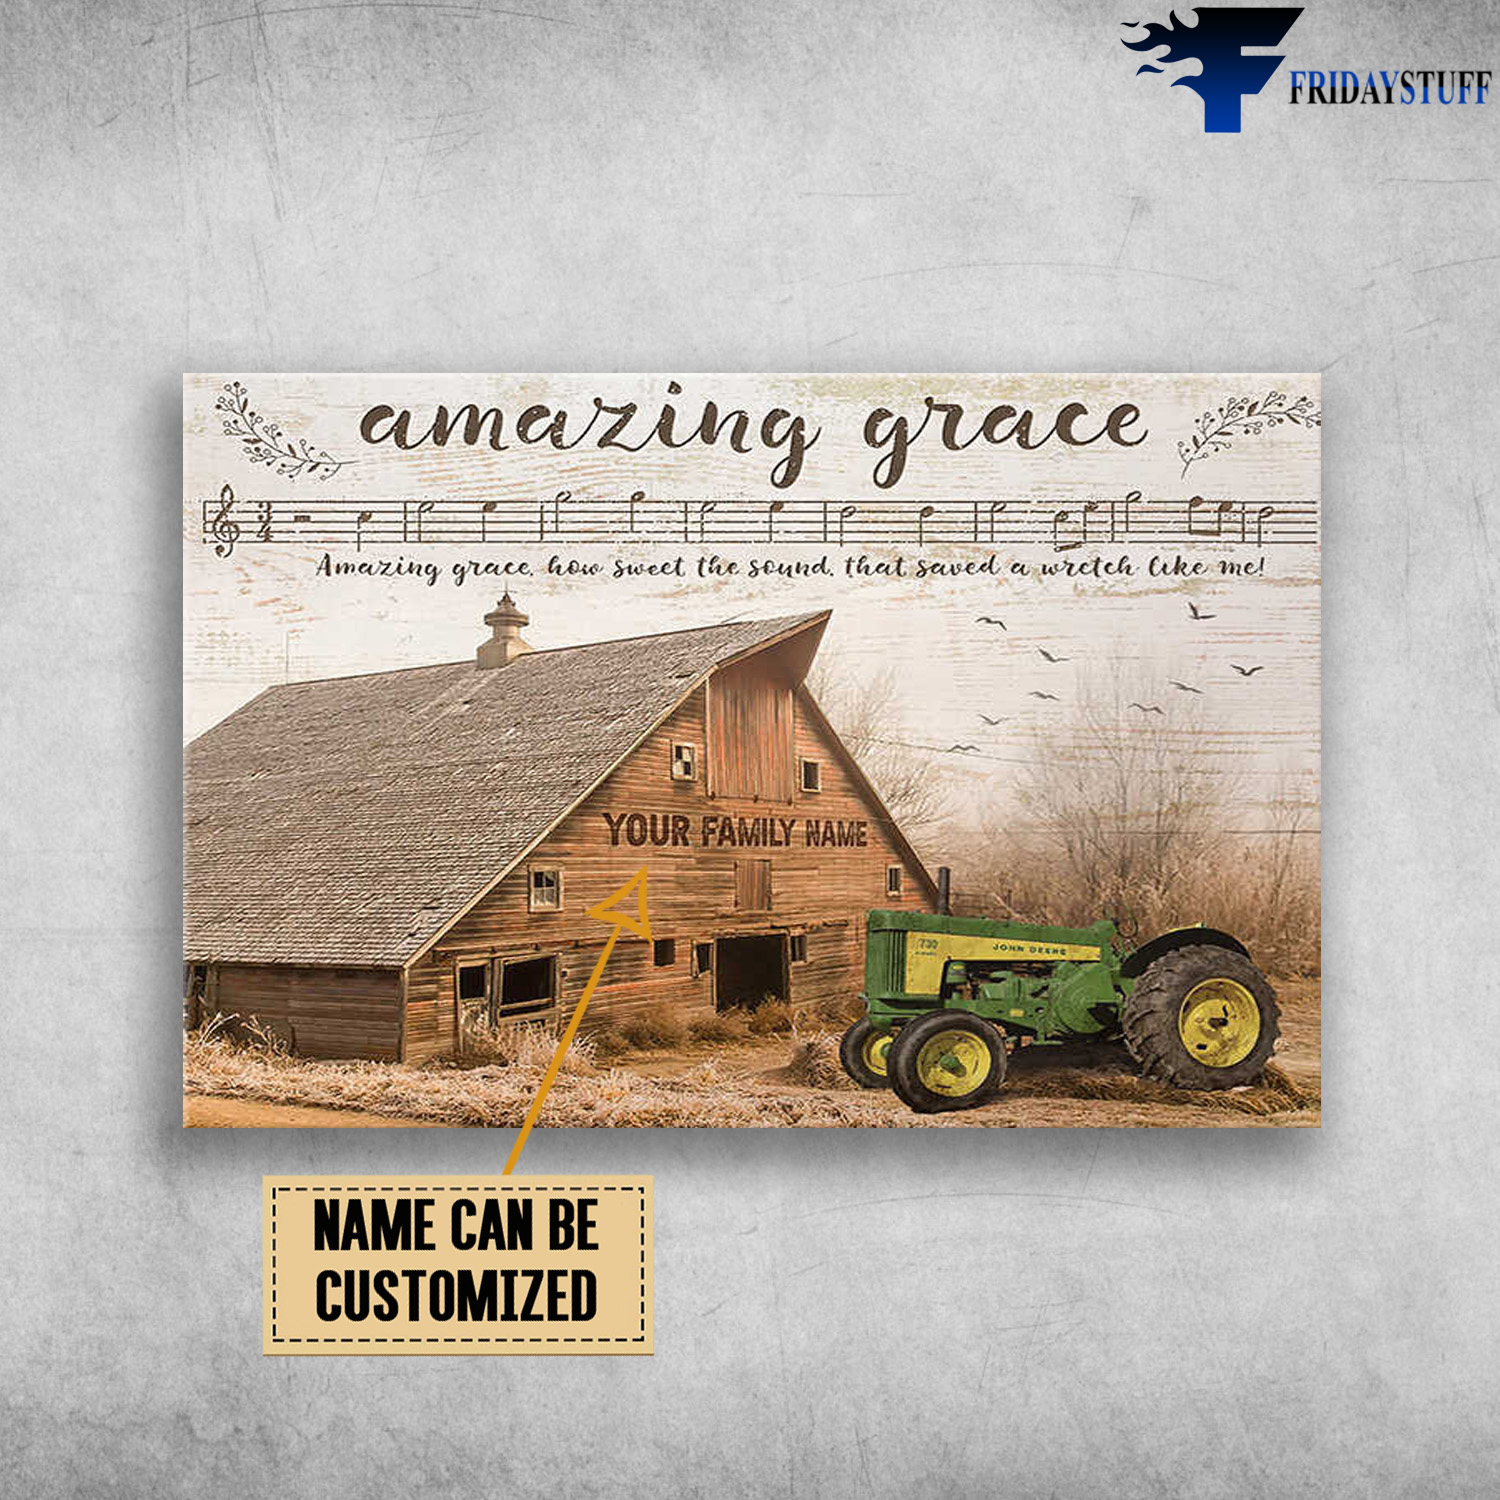 Tractor And House, Amazing Grace, Amazing Grace How Sweet The Sound, That Saved A Wretch Like Me